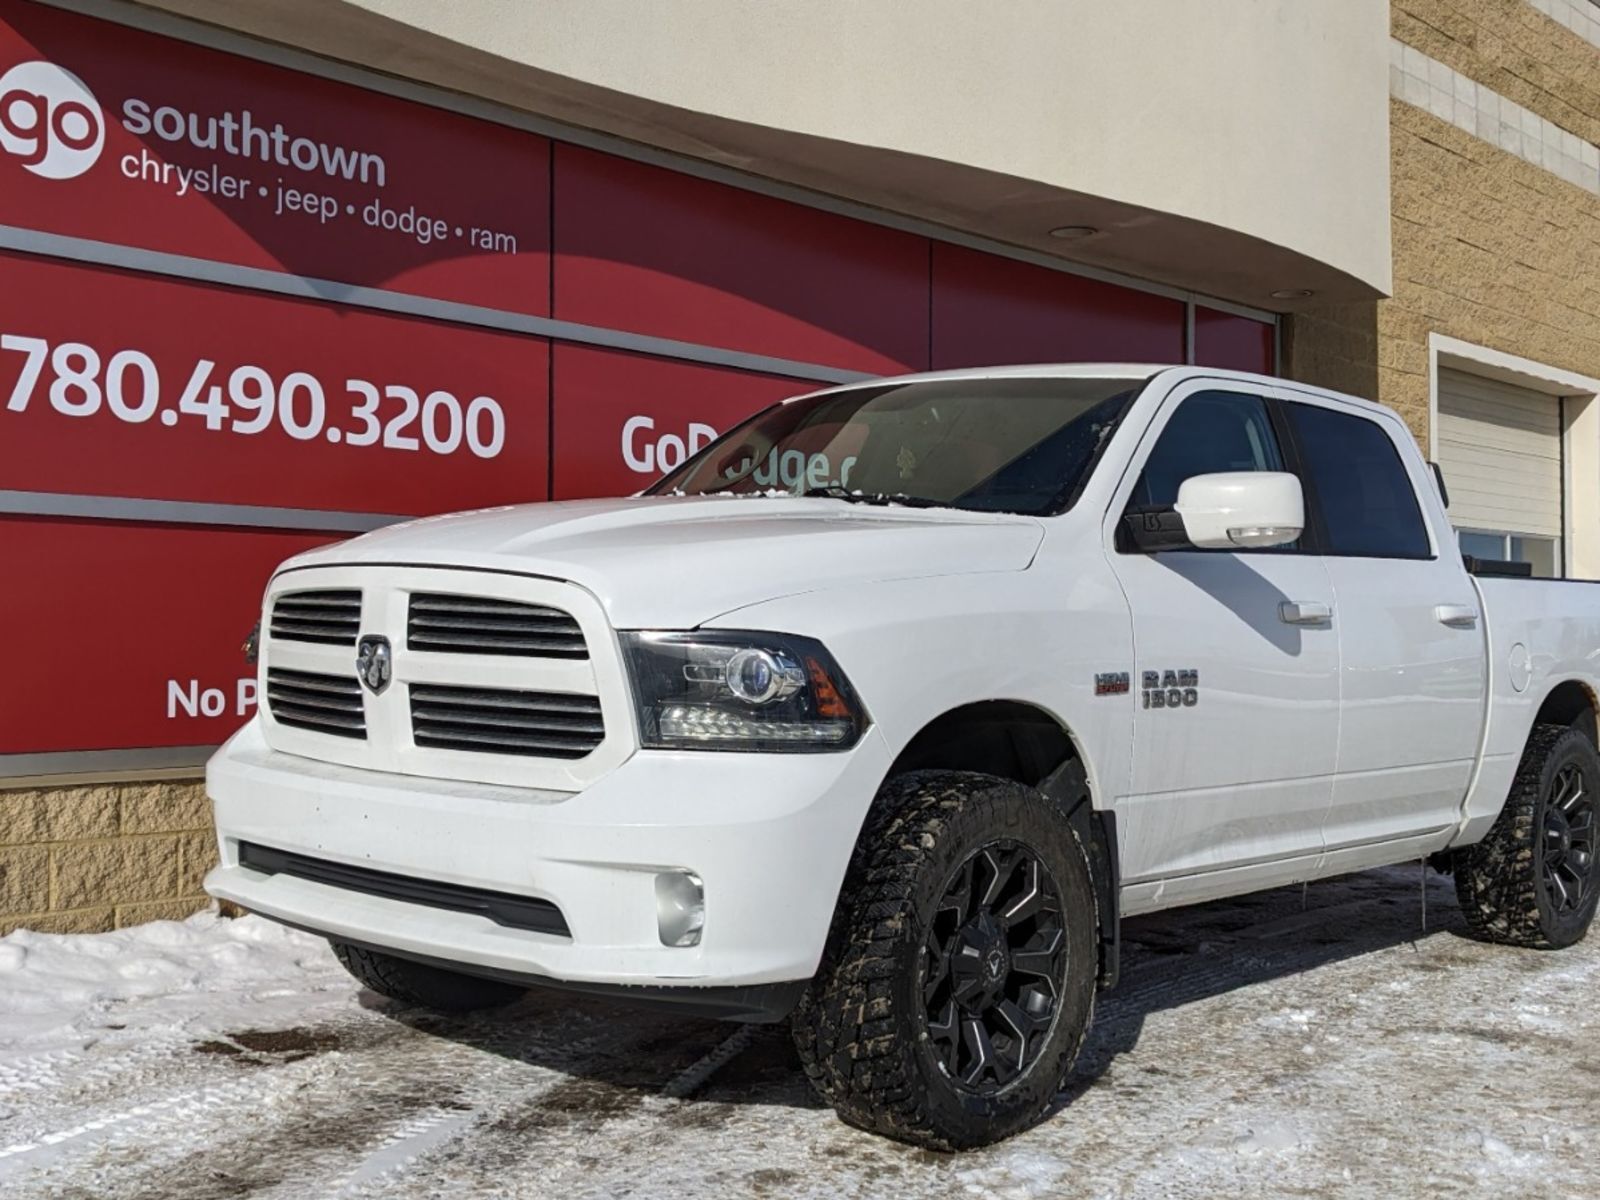 2016 Ram 1500 SPORT IN BRIGHT WHITE EQUIPPED WITH A 5.7L HEMI V8